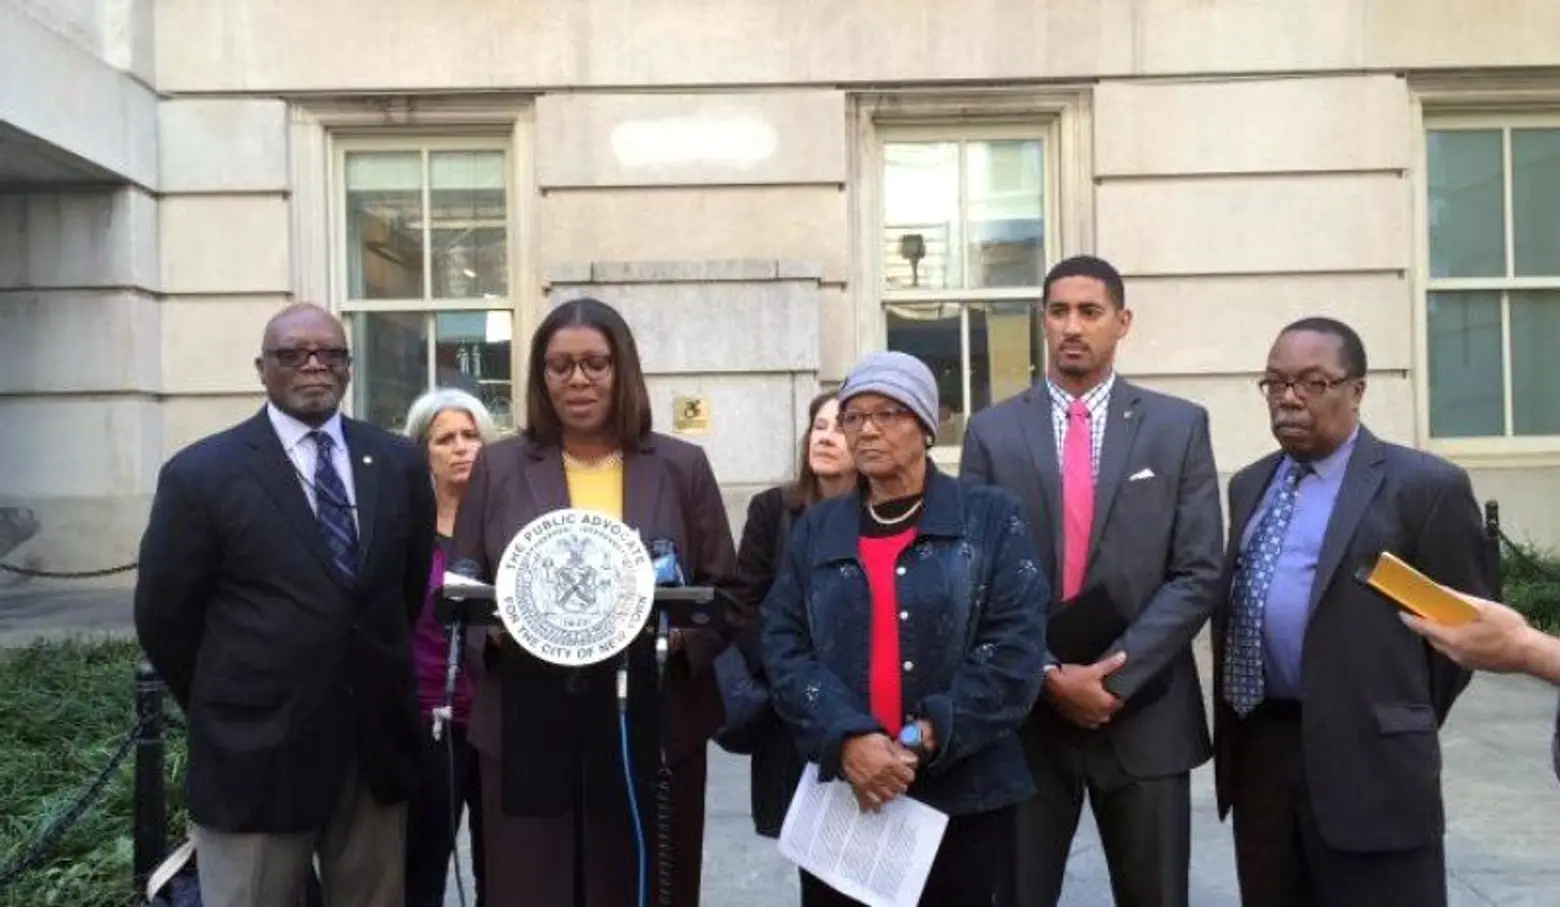 Public Advocate Letitia James, NYC government, affordable housing